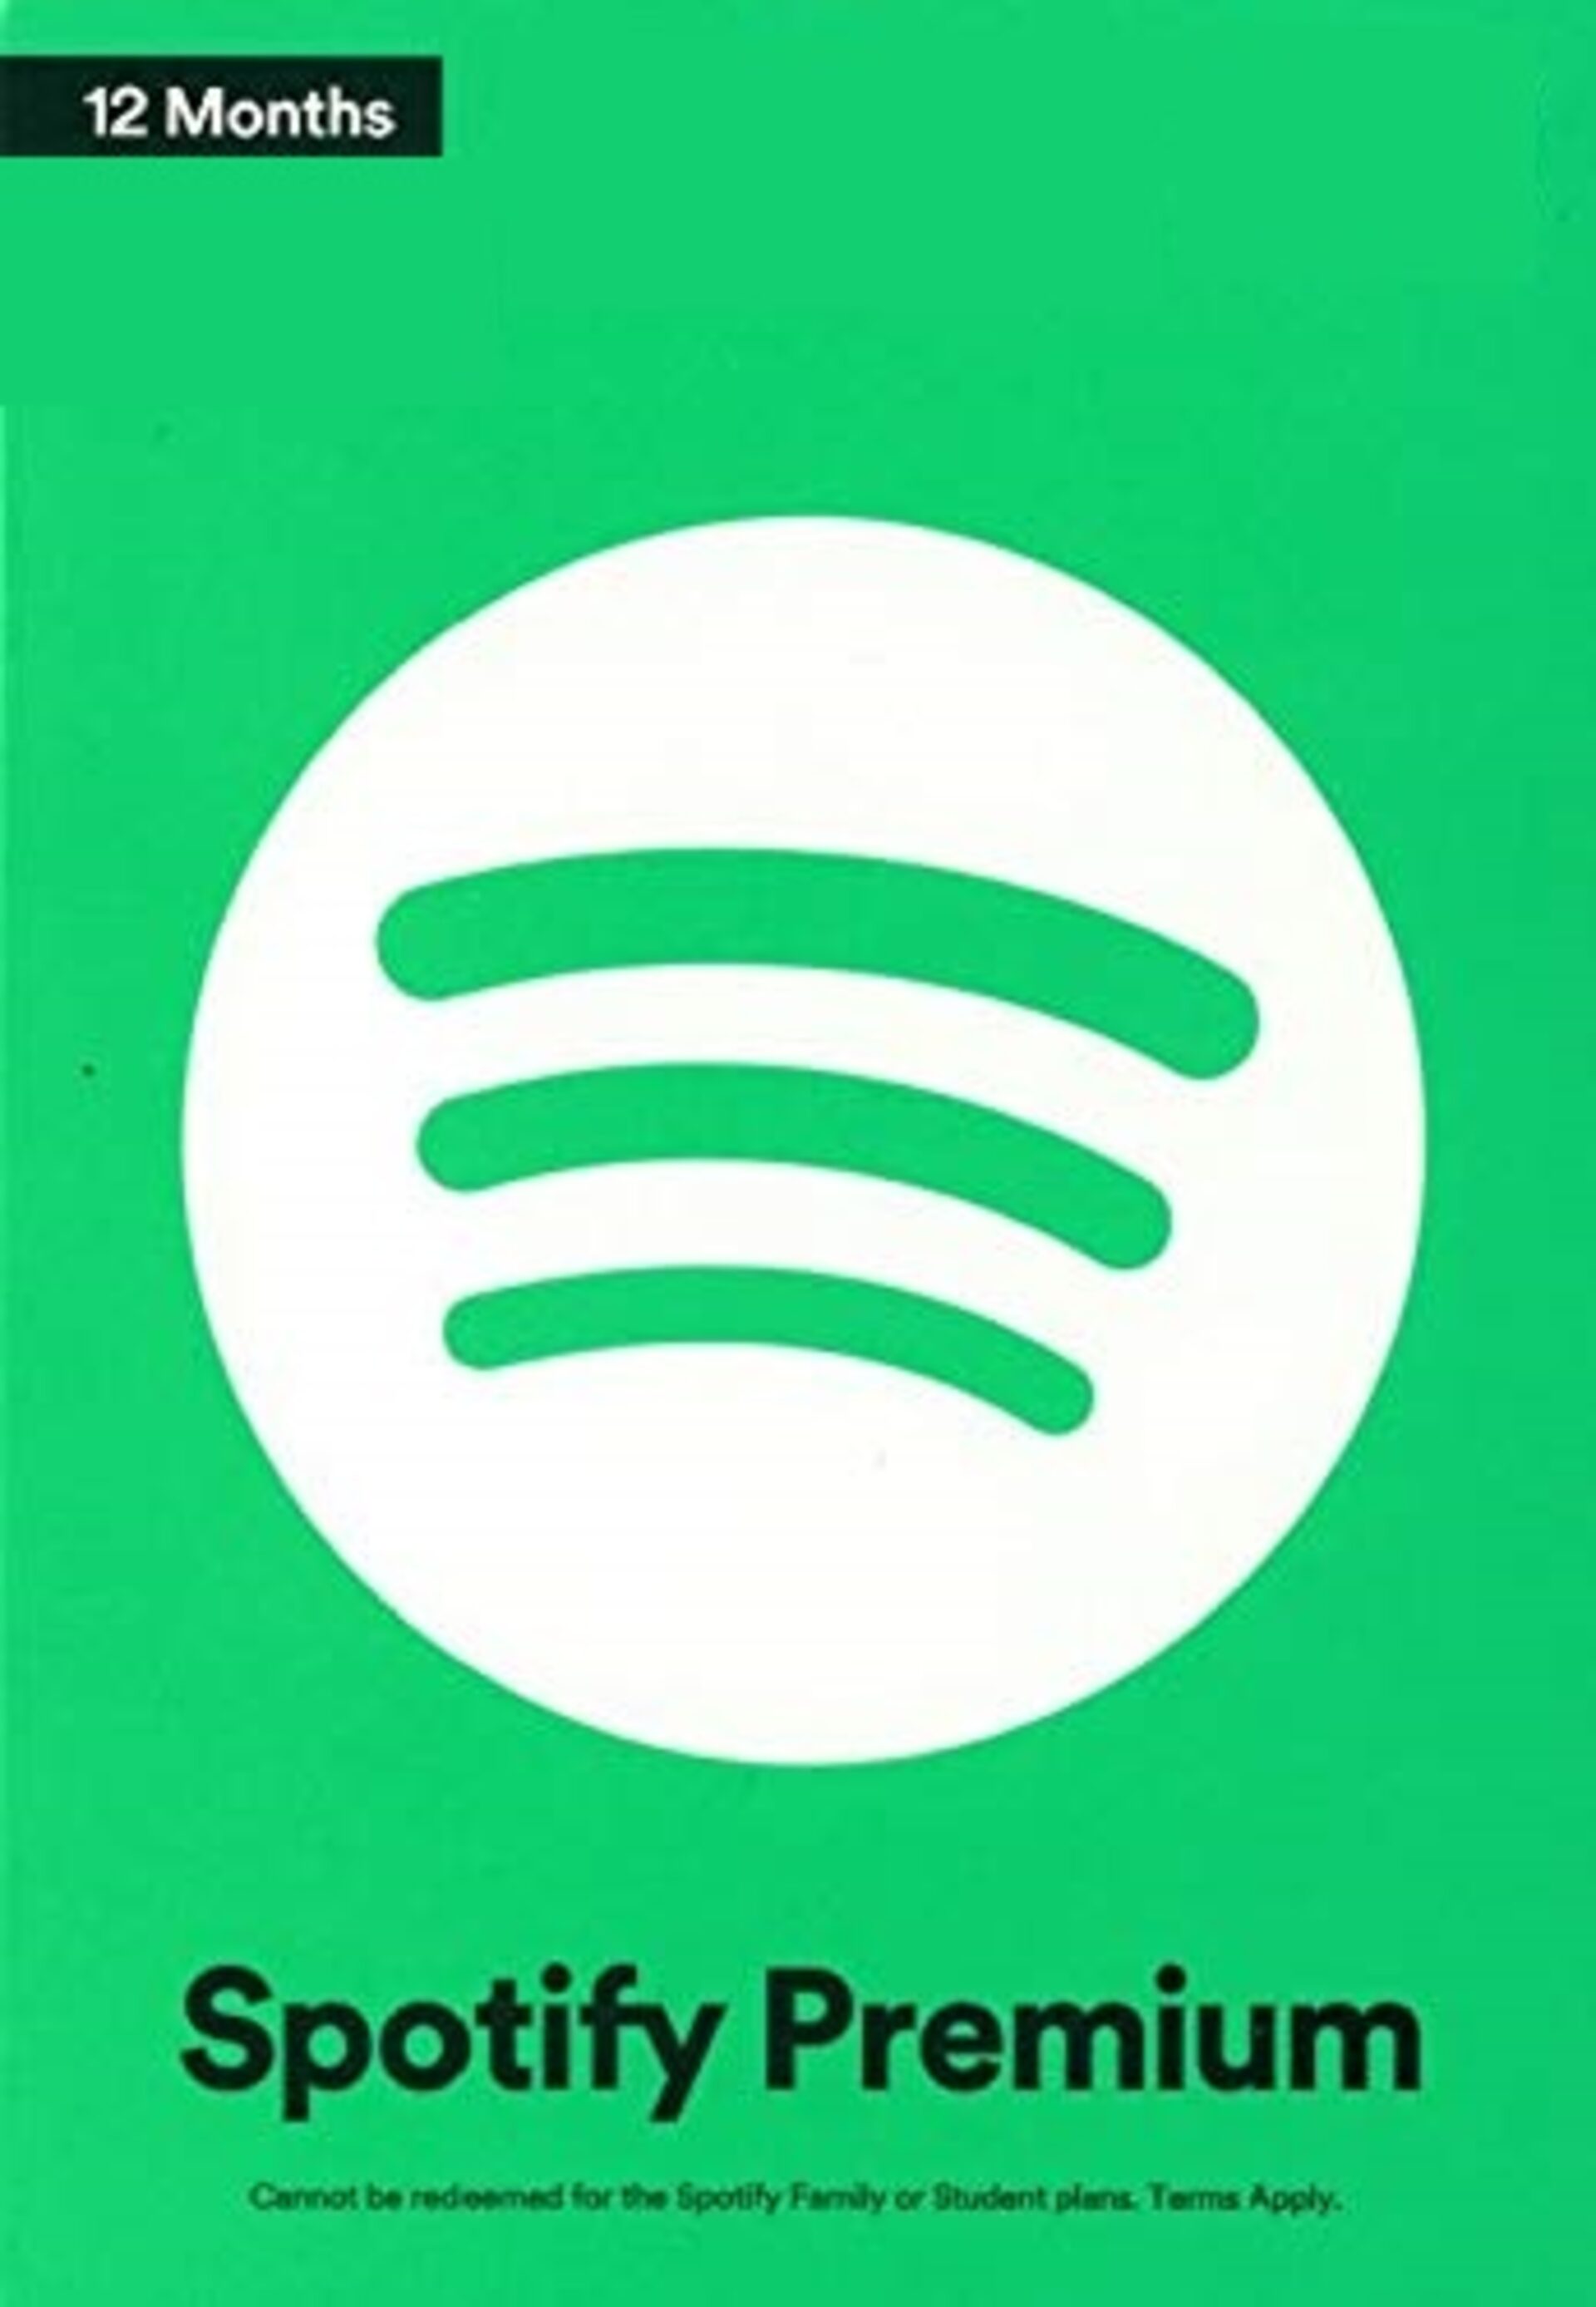 Amazon.com: Spotify Premium 6 Month Subscription $60 Thanksgiving eGift Card:  Gift Cards